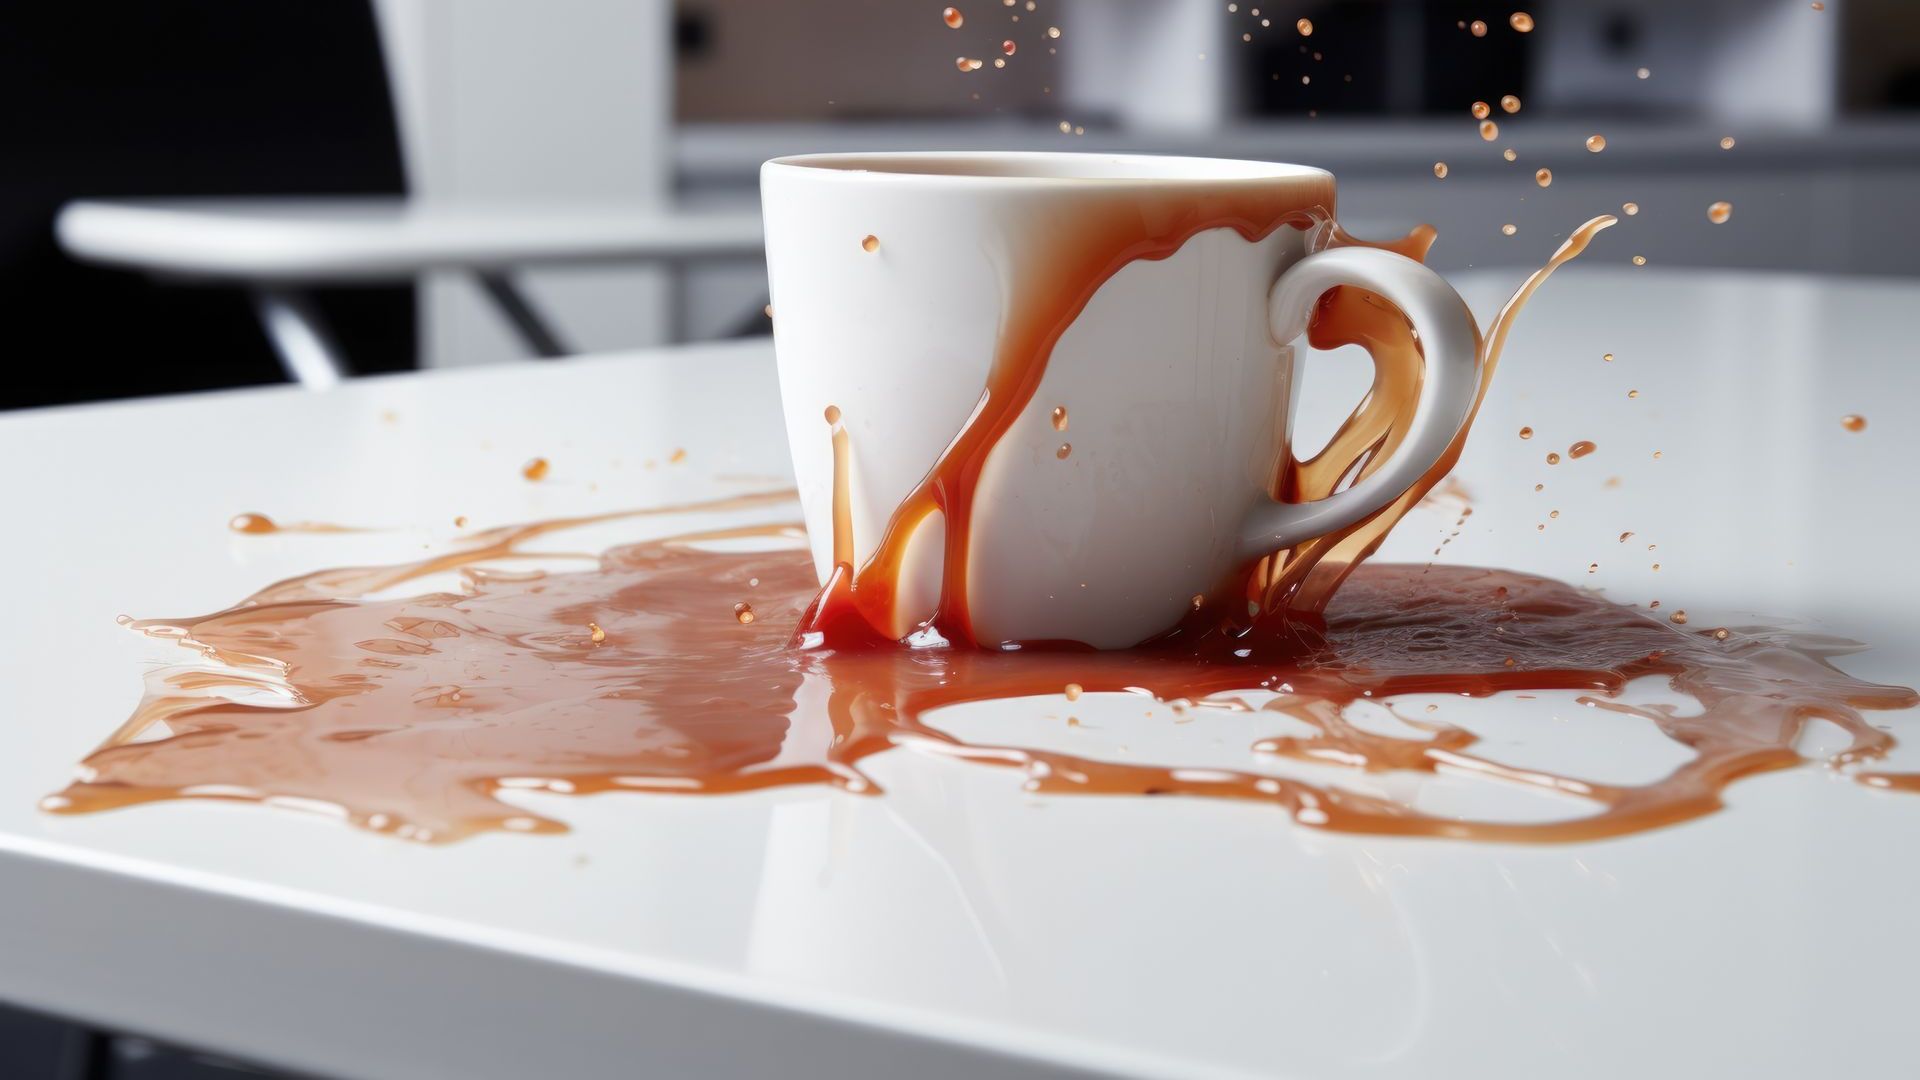 Coffee dramatically spilling out of a white mug onto a white table. 